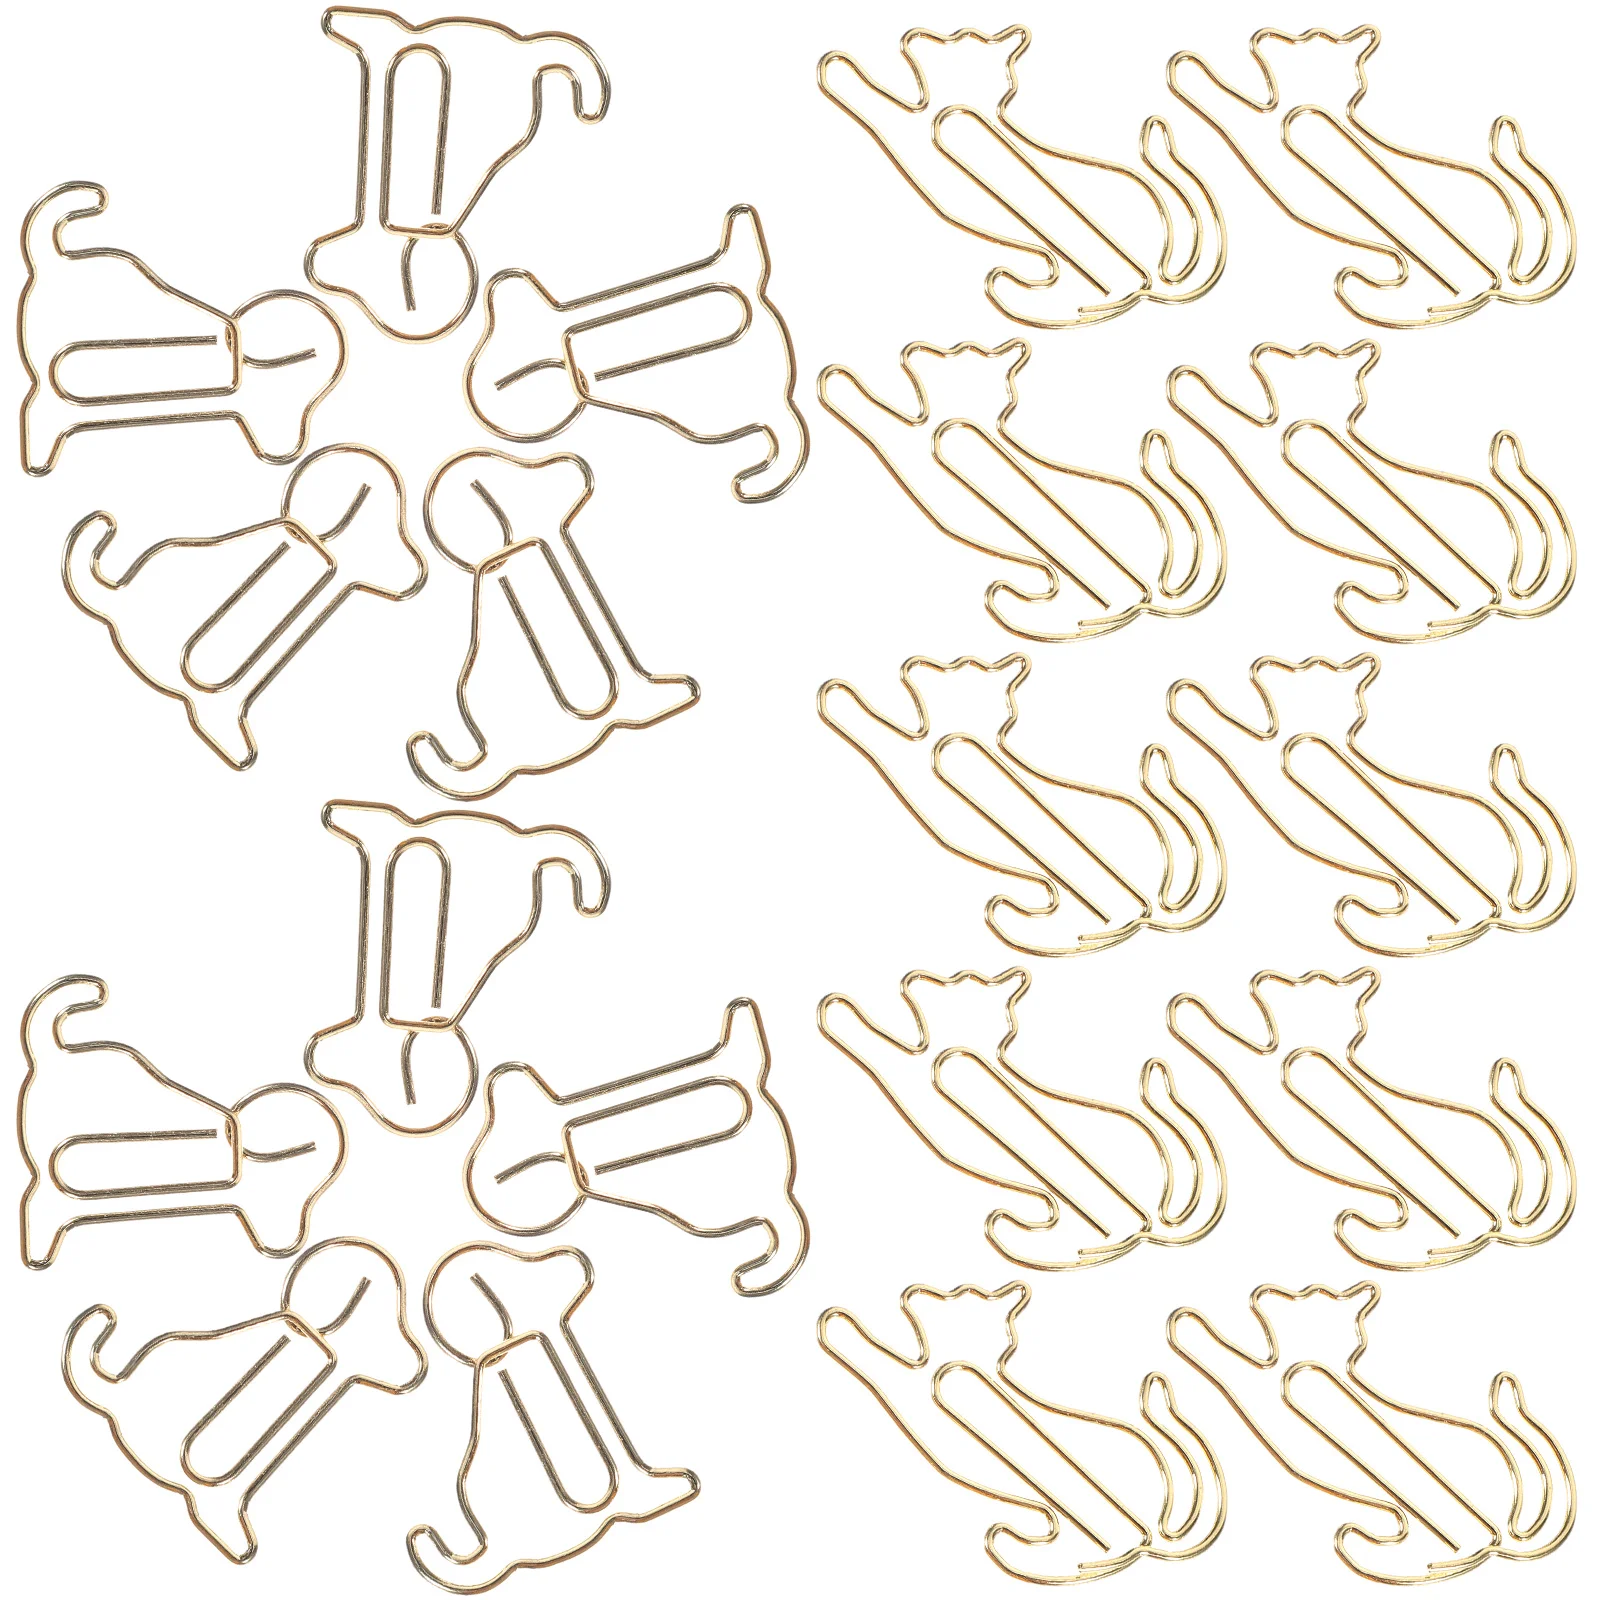 

Animal Paper Clip Cat Shape Paperclip Puppy Delicate Paperclips Adorable Dog Love Animals Shaped